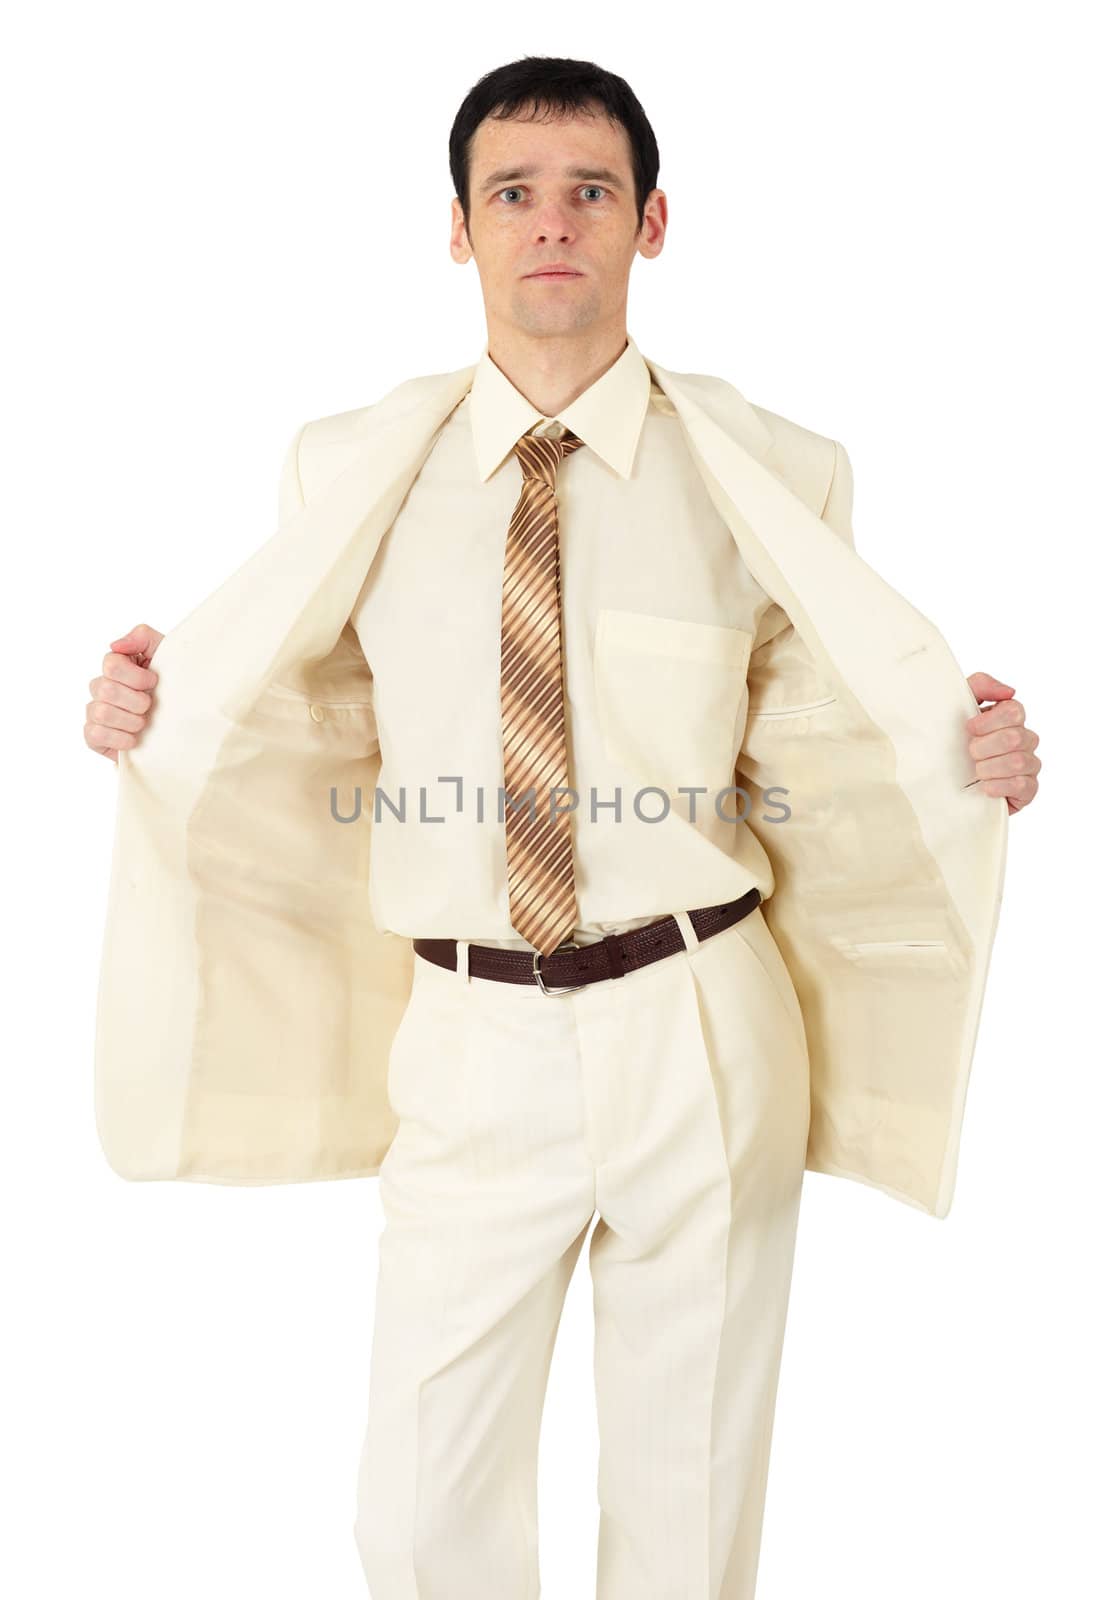 Fashionably dressed young man on a white background